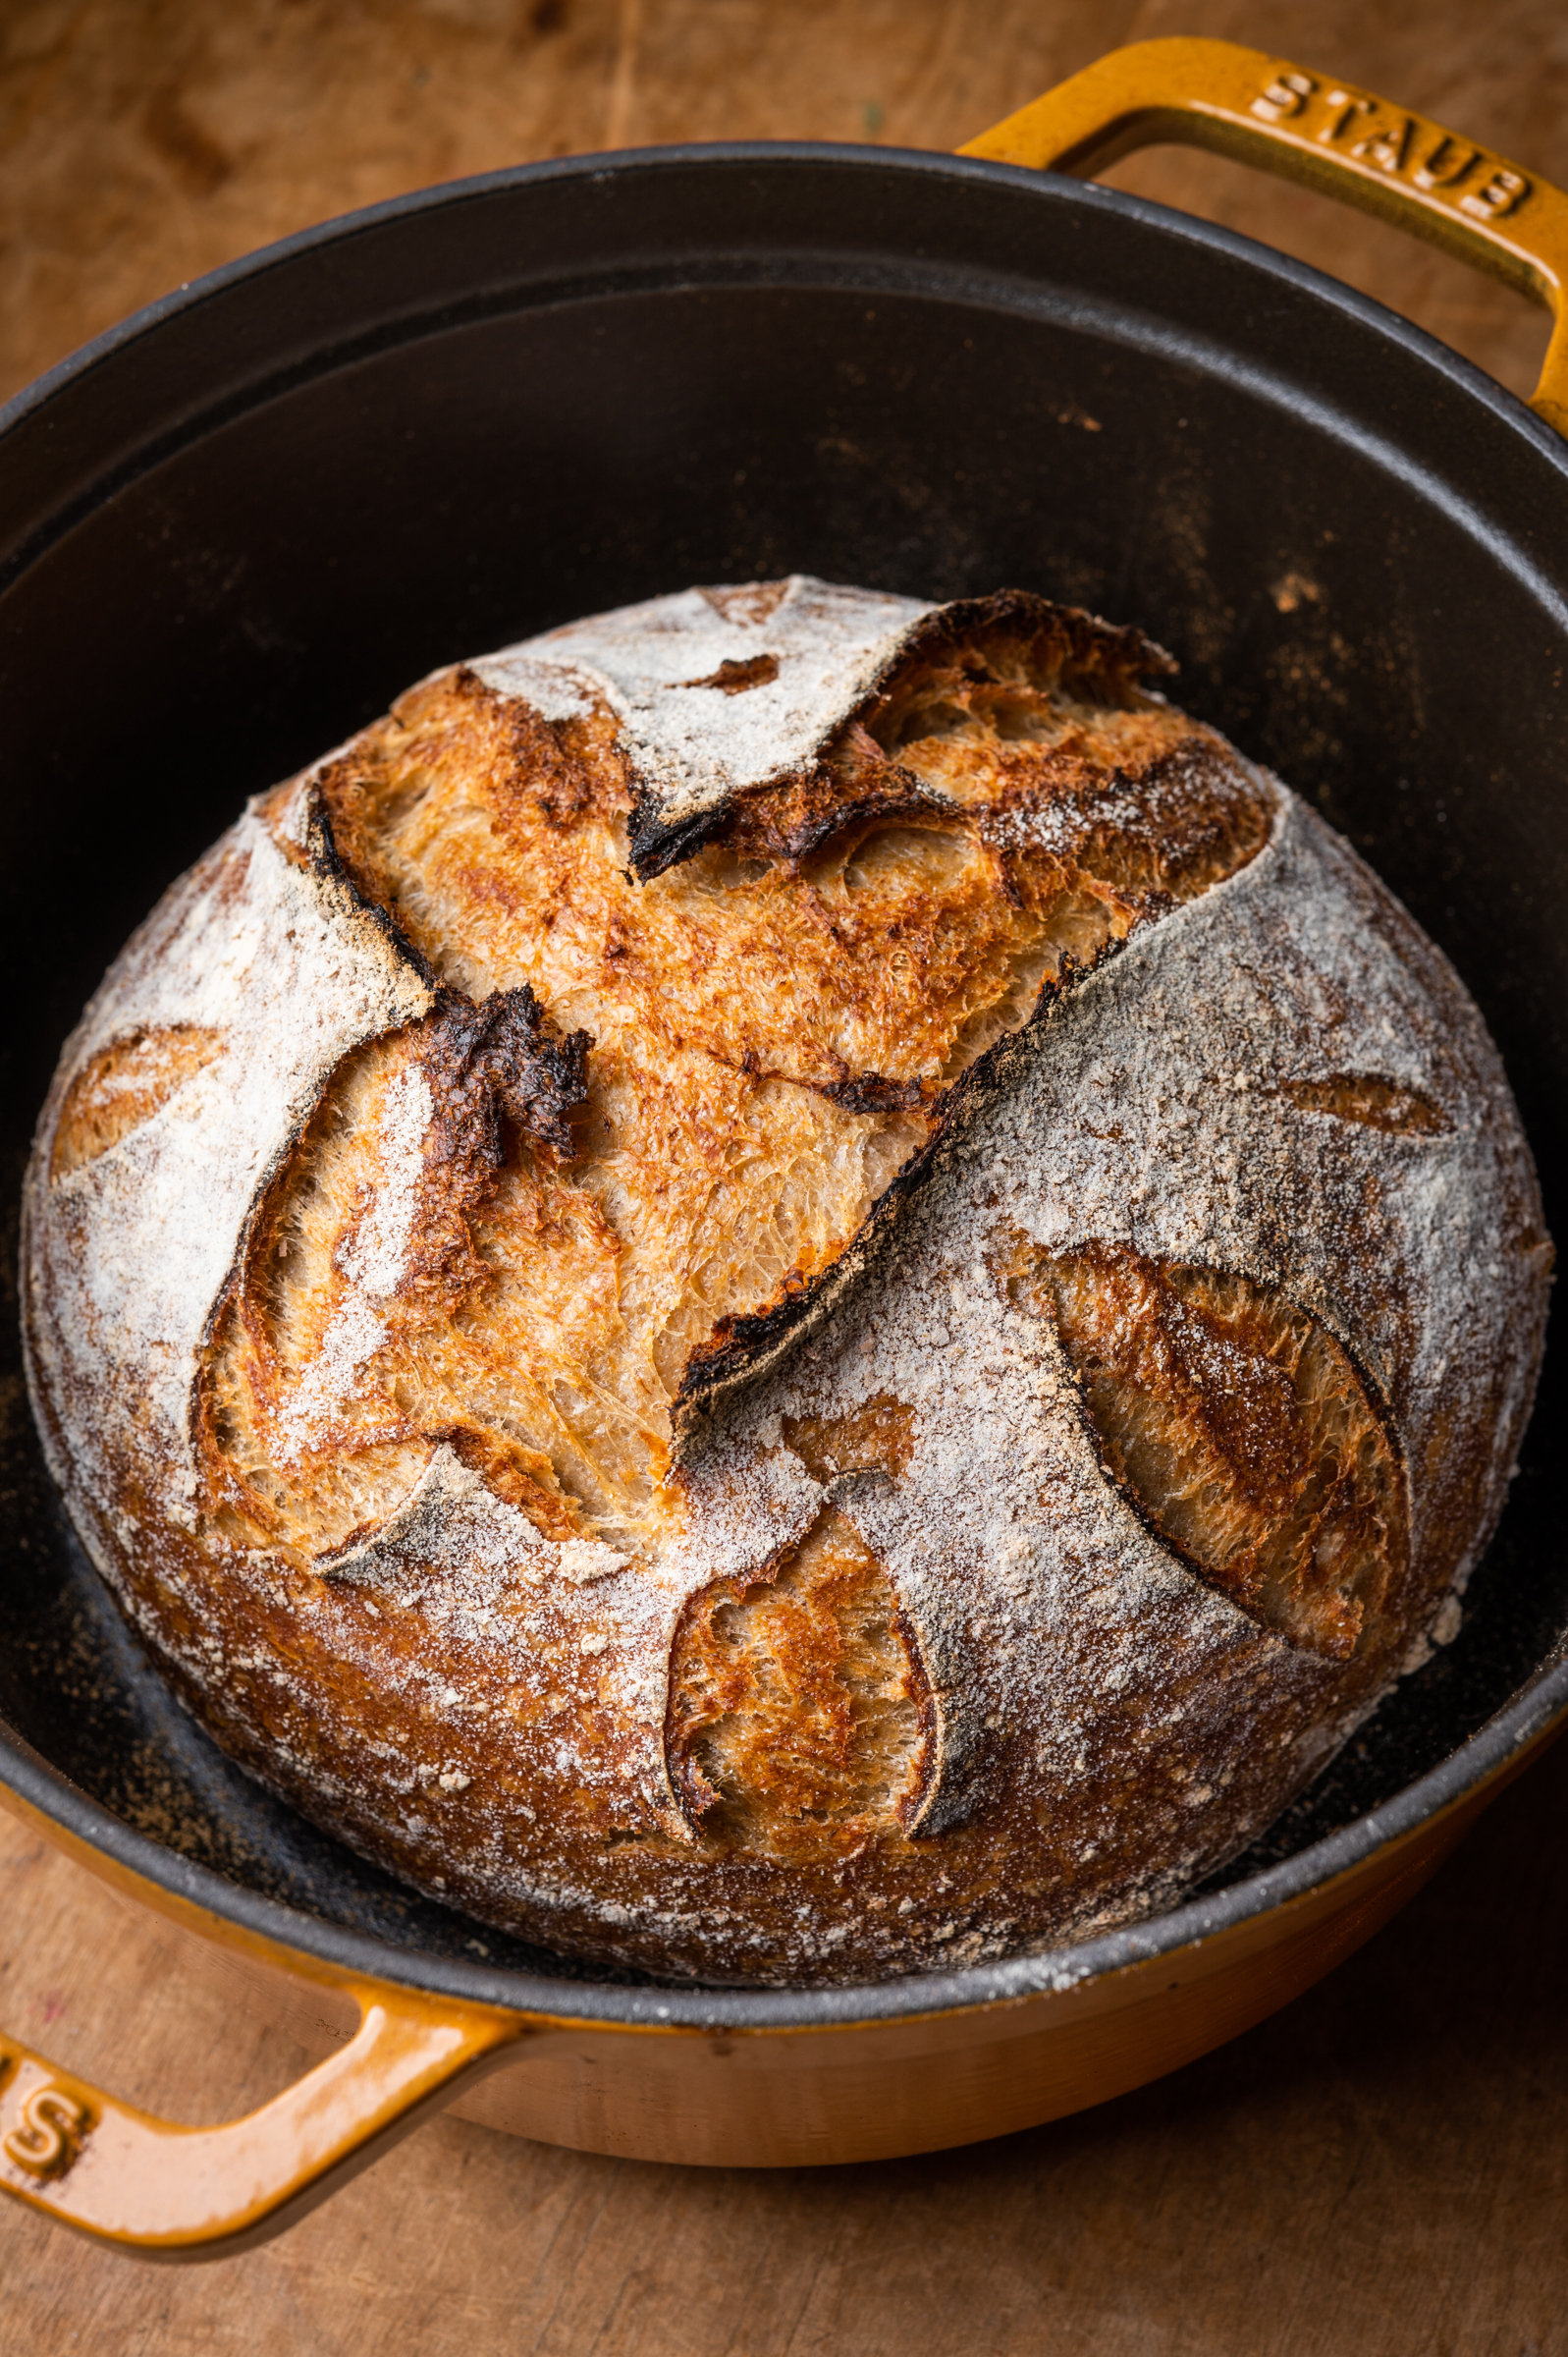 Whole wheat and rye sourdough baked in a Staub Dutch oven